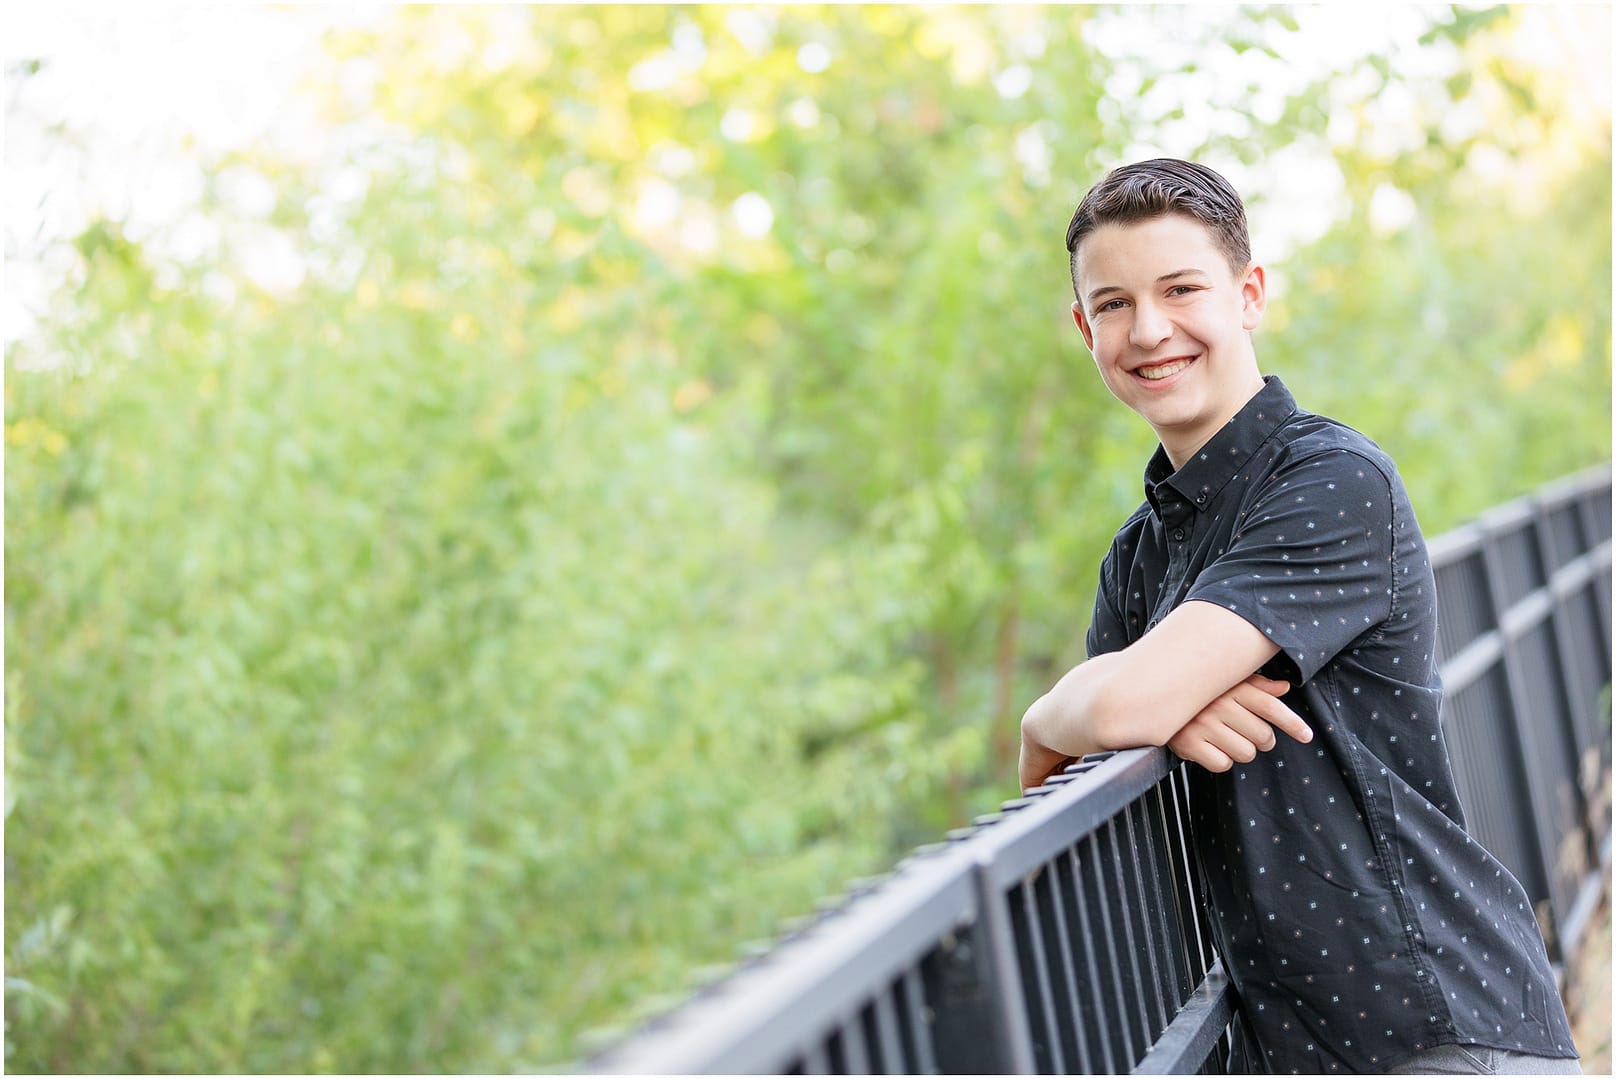 Teen by leans against fence during portrait session in Boise. Photo by Tiffany Hix Photography.